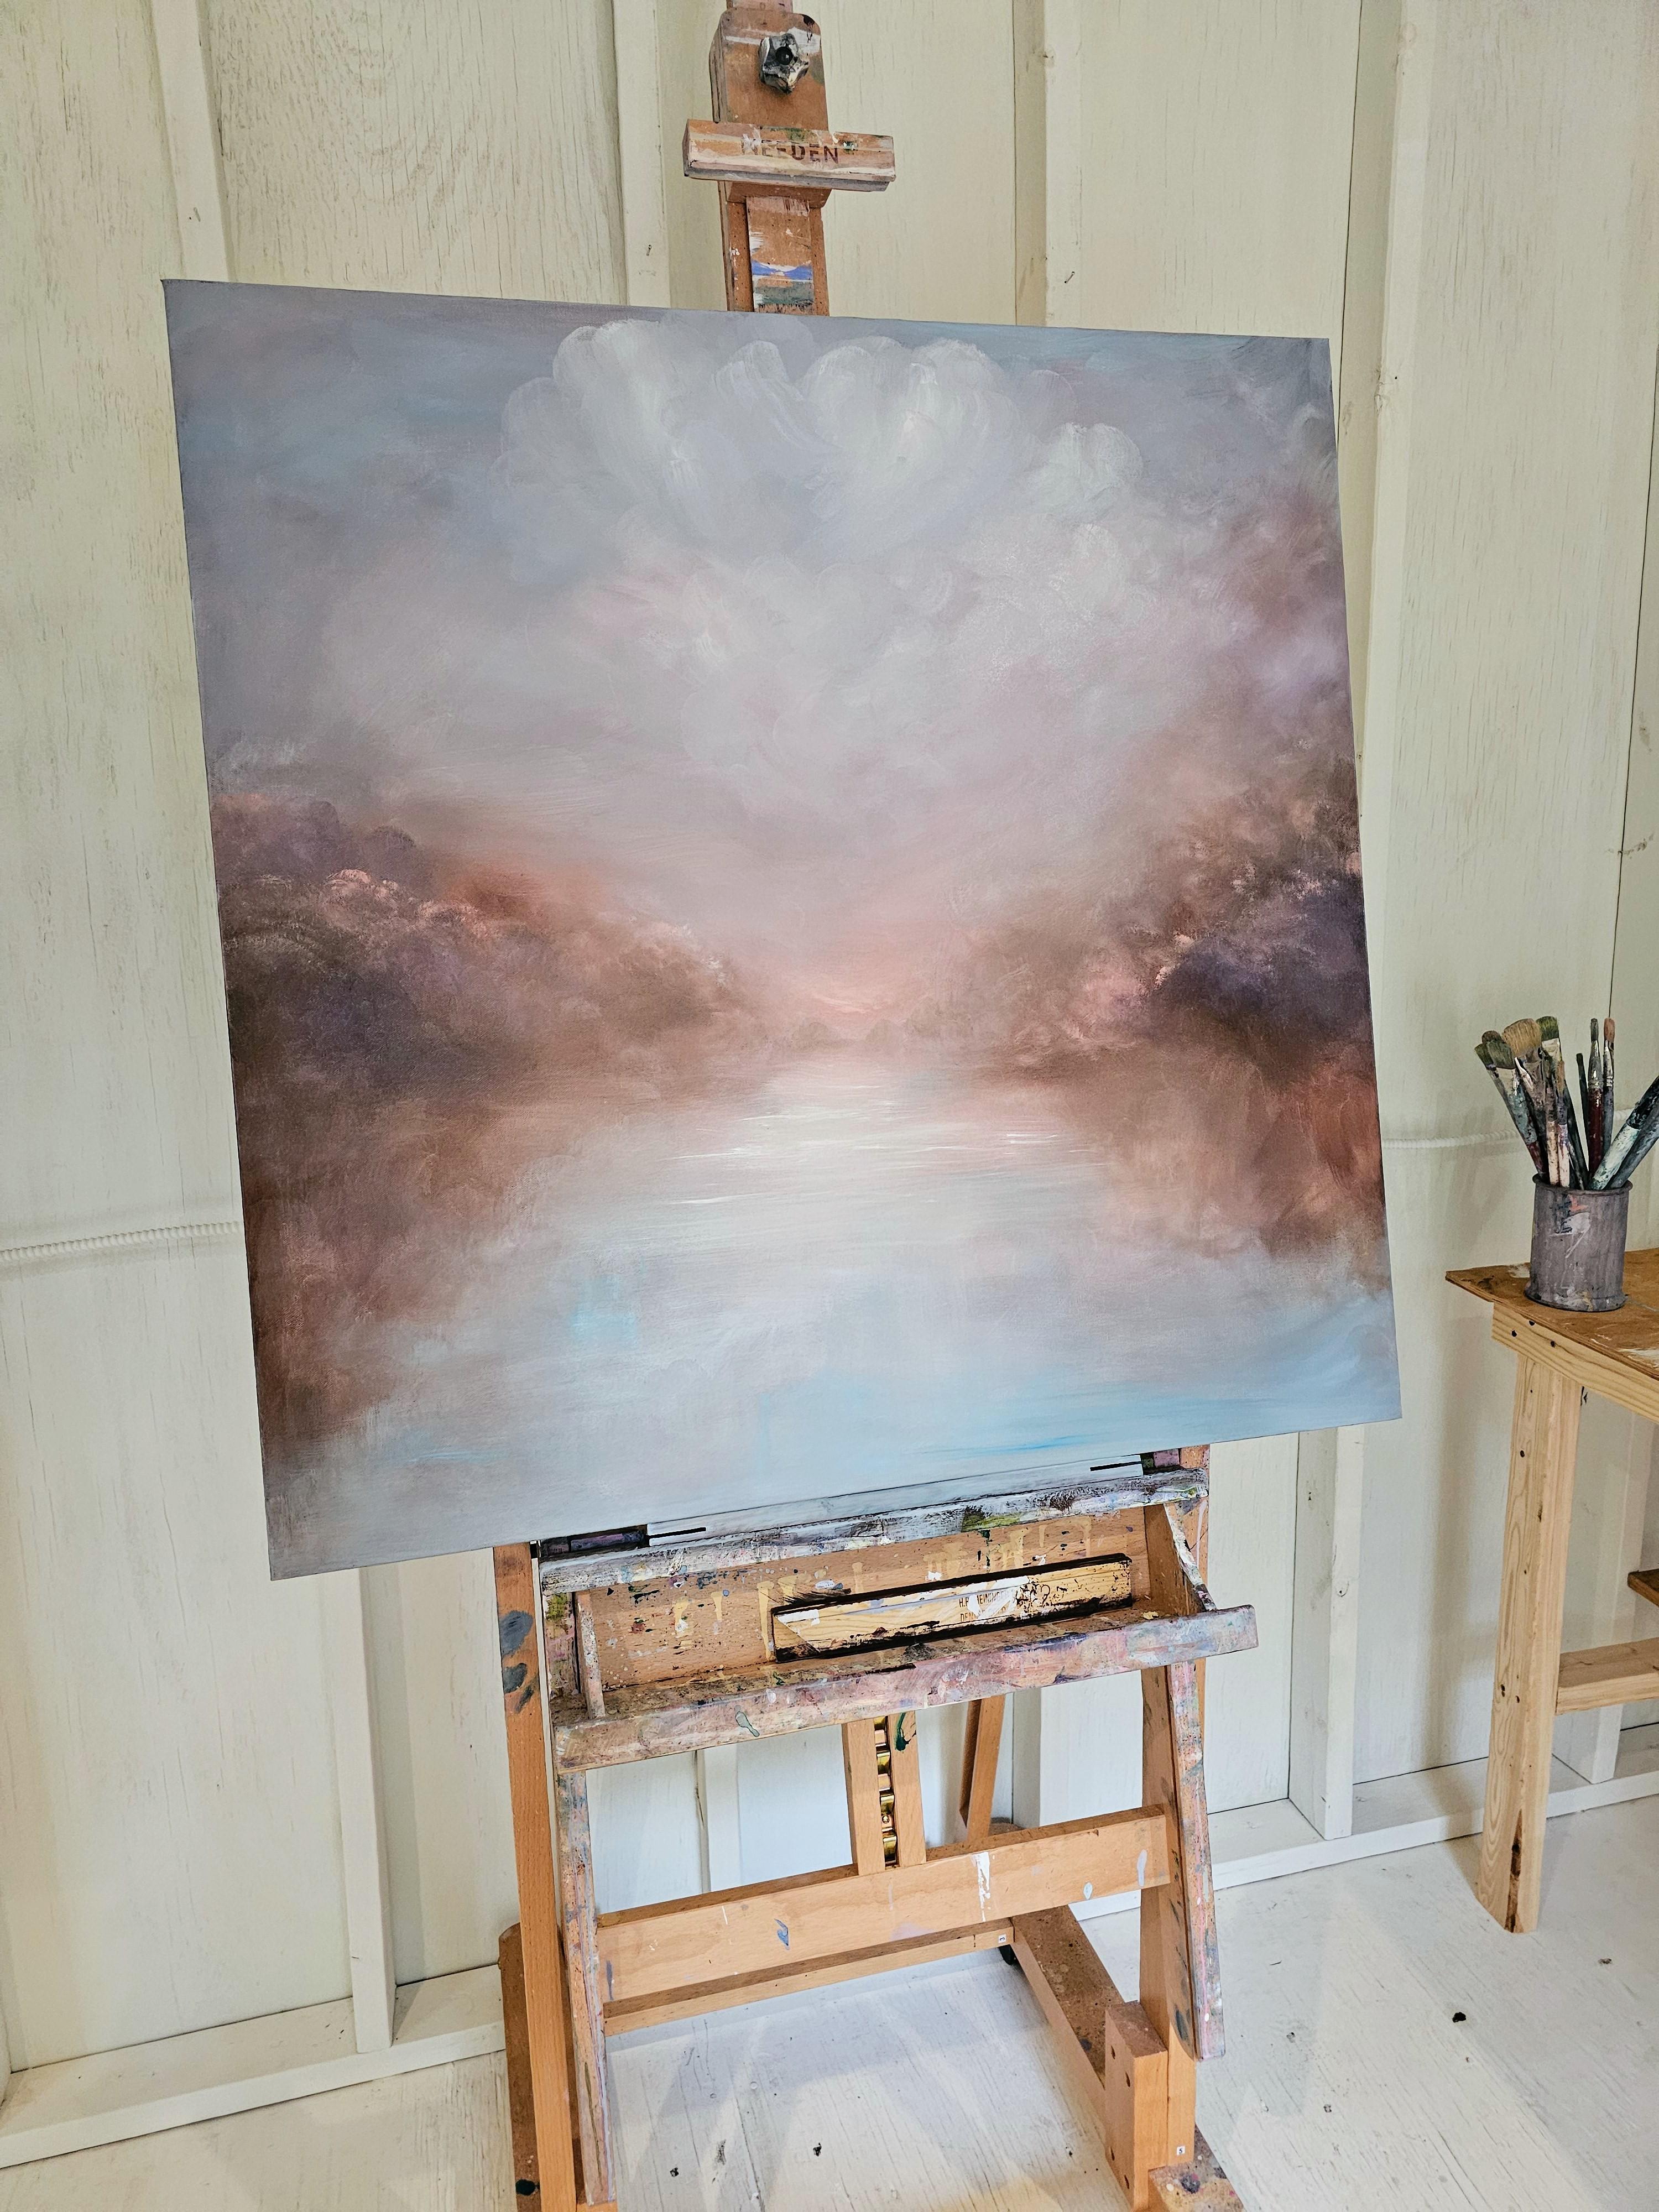 In this stirring canvas, I've swirled emotions into a maelstrom of color, capturing an ephemeral moment where sky meets water. Shades coalesce in a passionate dance, evoking a sense of tranquil dynamism. It's an ode to the intangible, a hymn to the